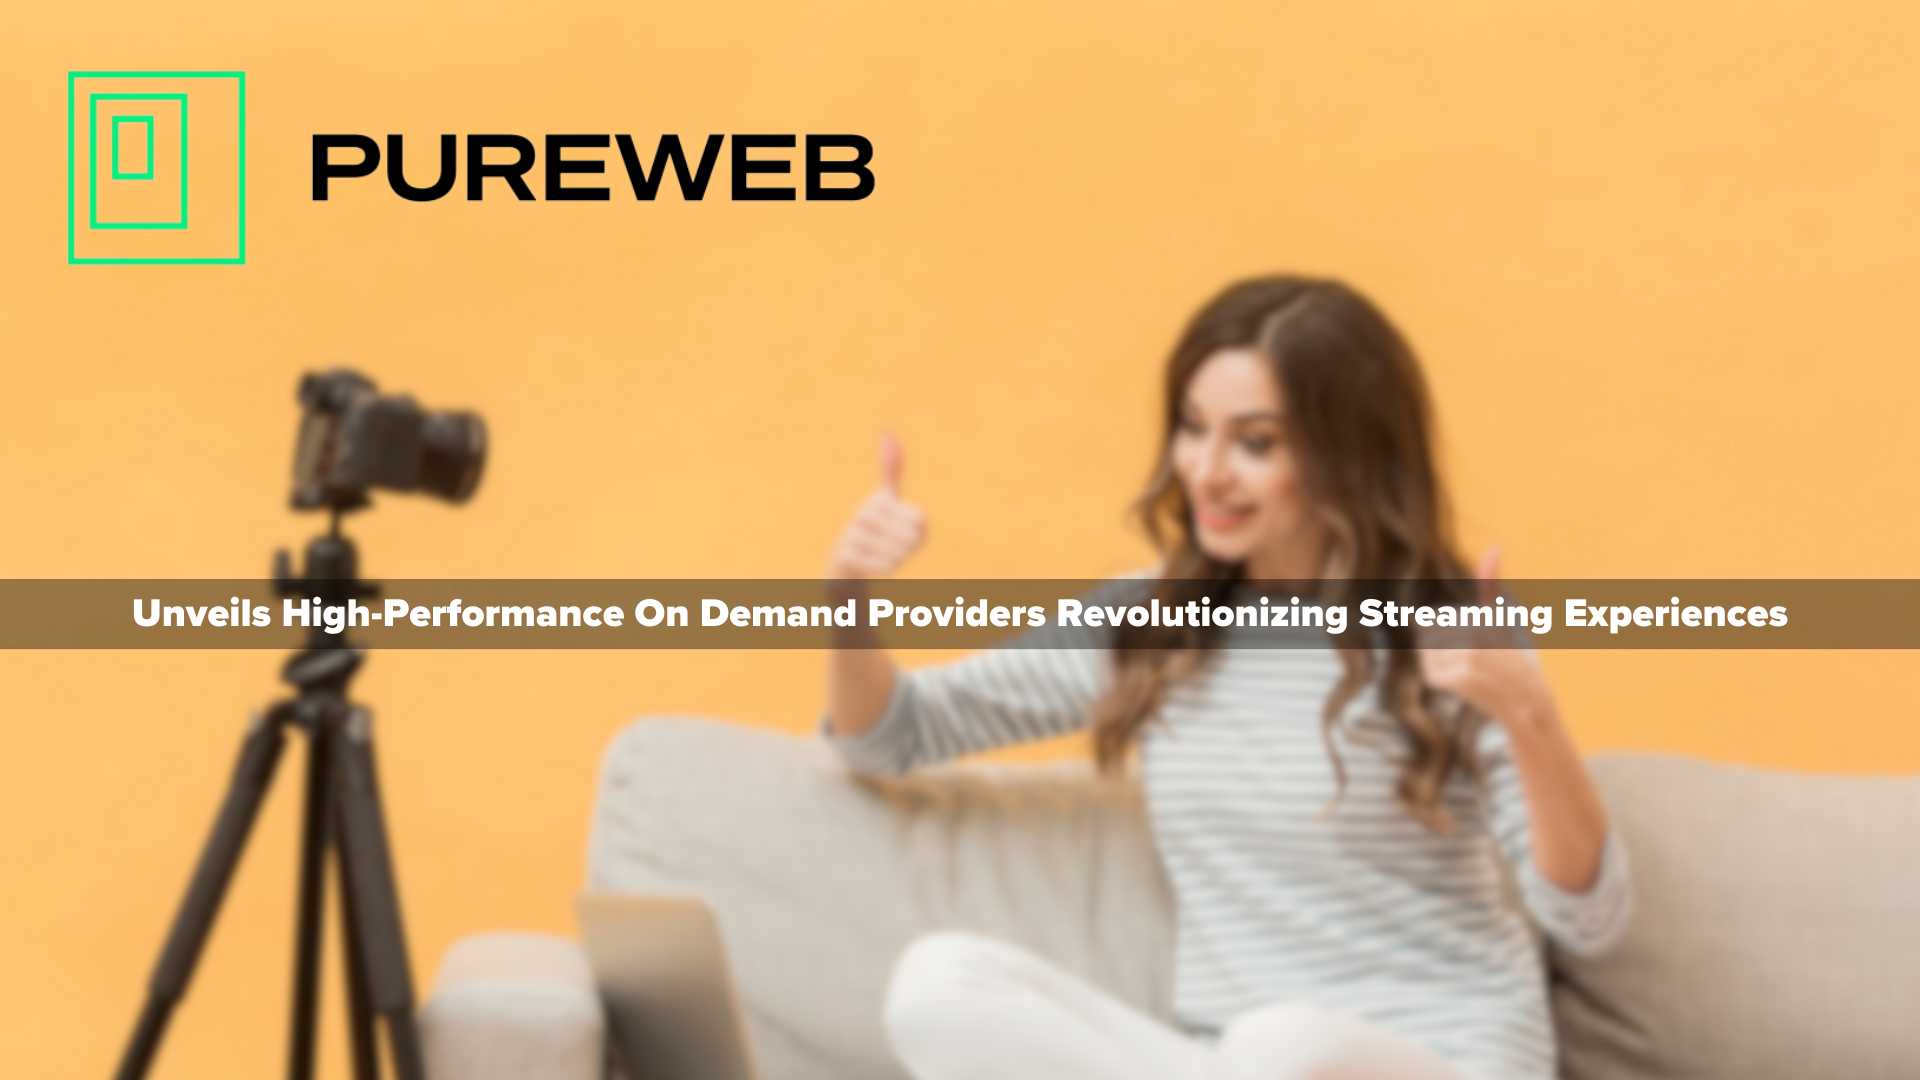 PureWeb Unveils High-Performance On Demand Providers Revolutionizing Streaming Experiences